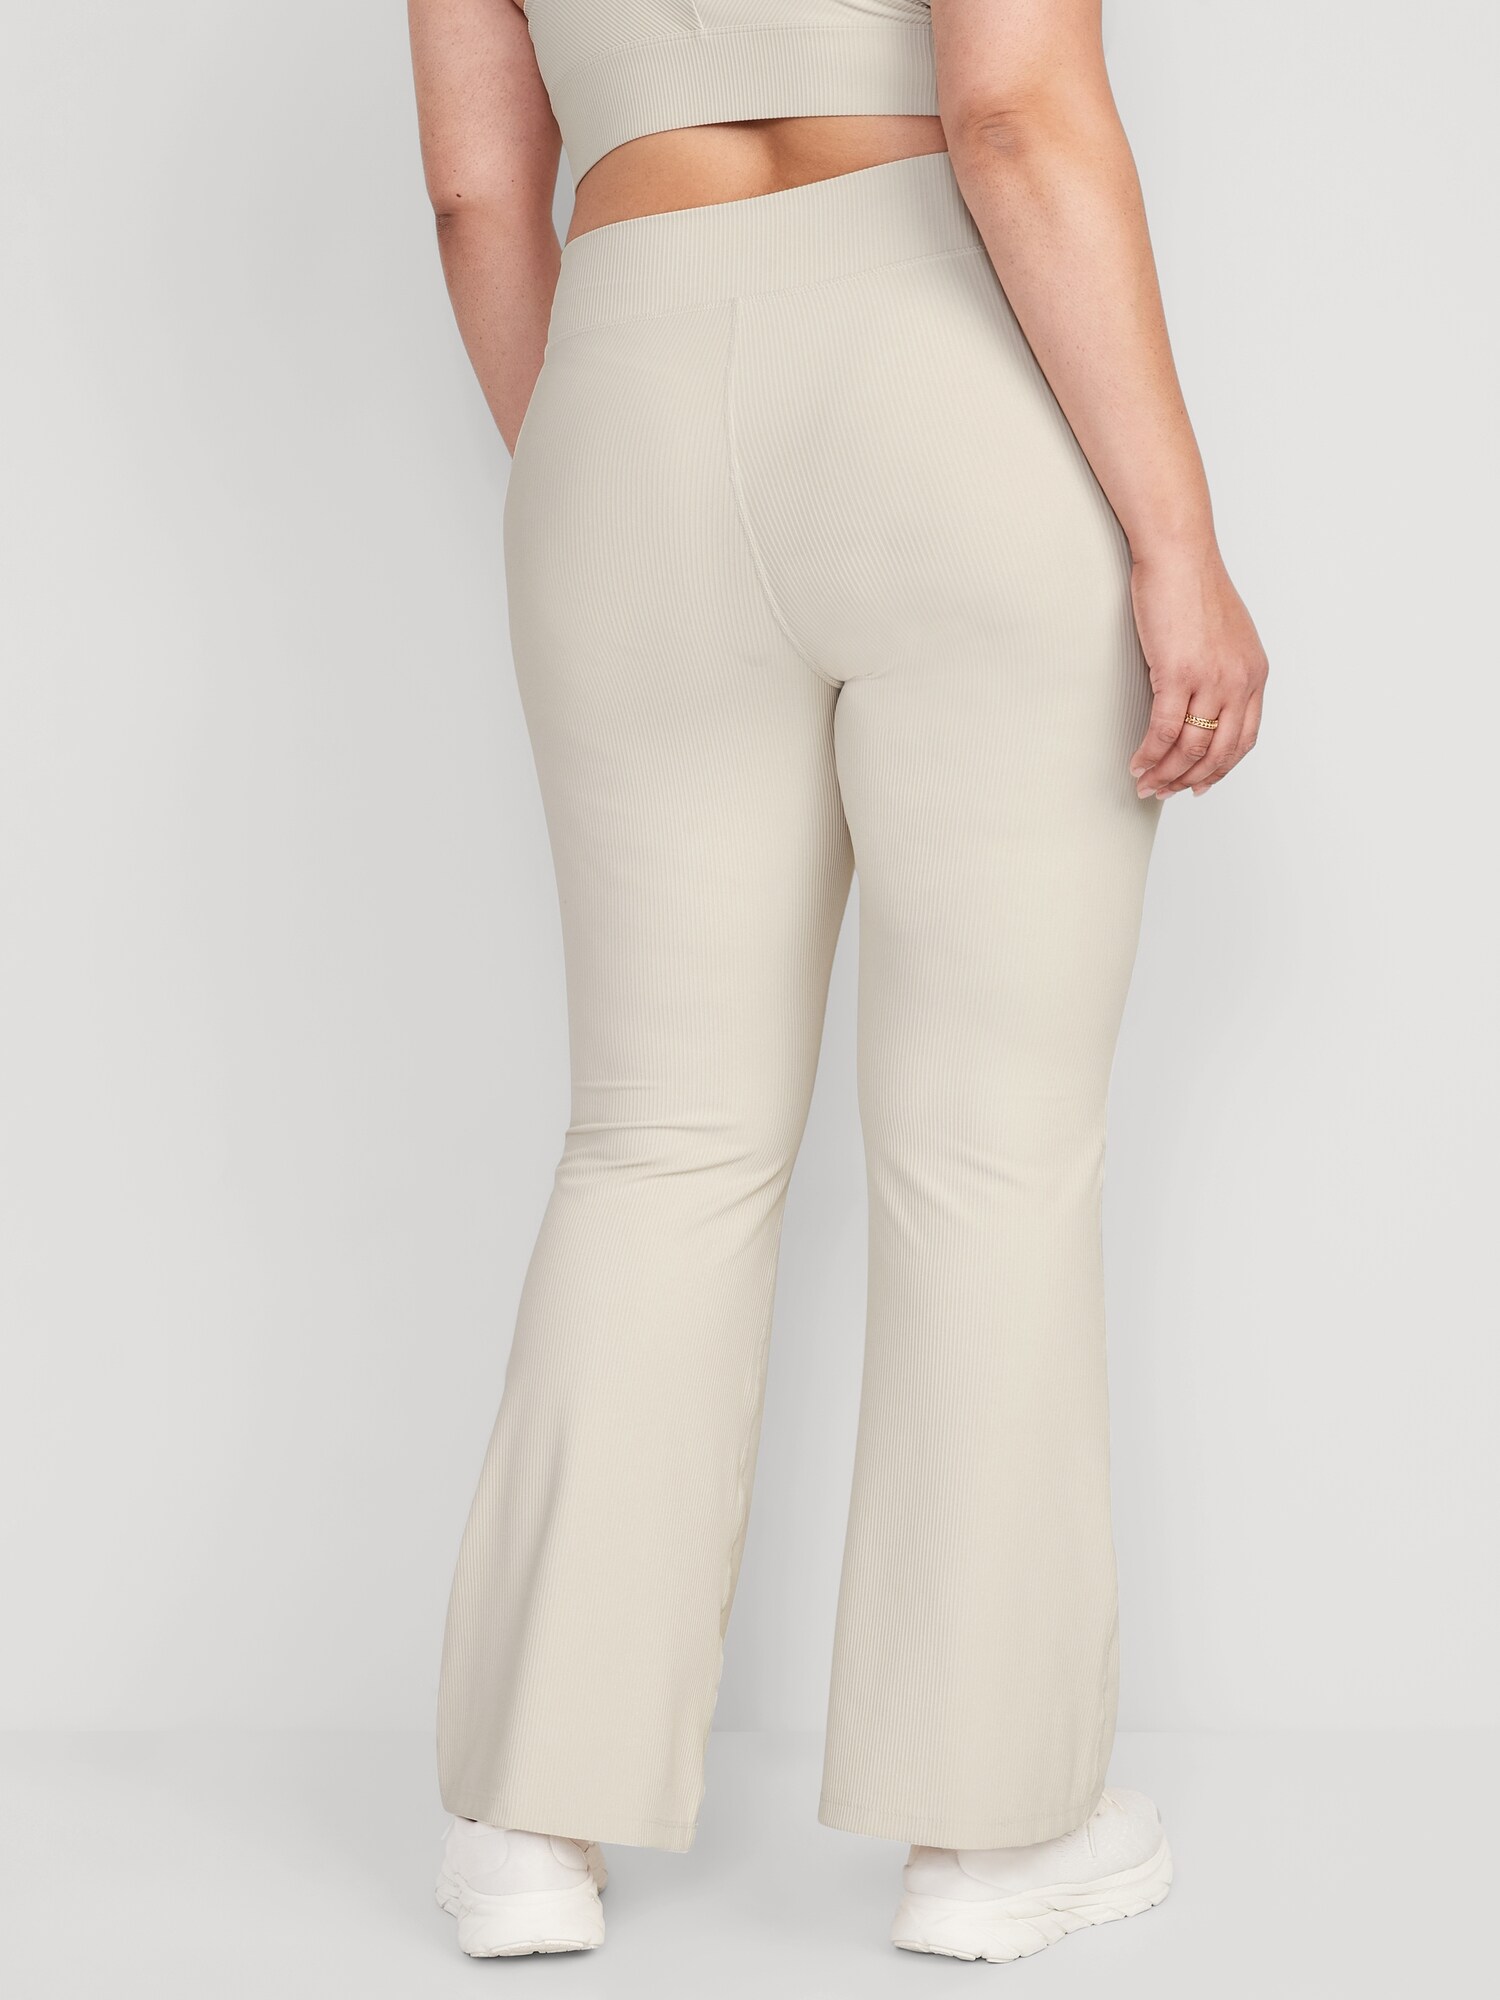 Lucy - White High Waisted Kick Flare Trousers | Trousers | Miss G Couture